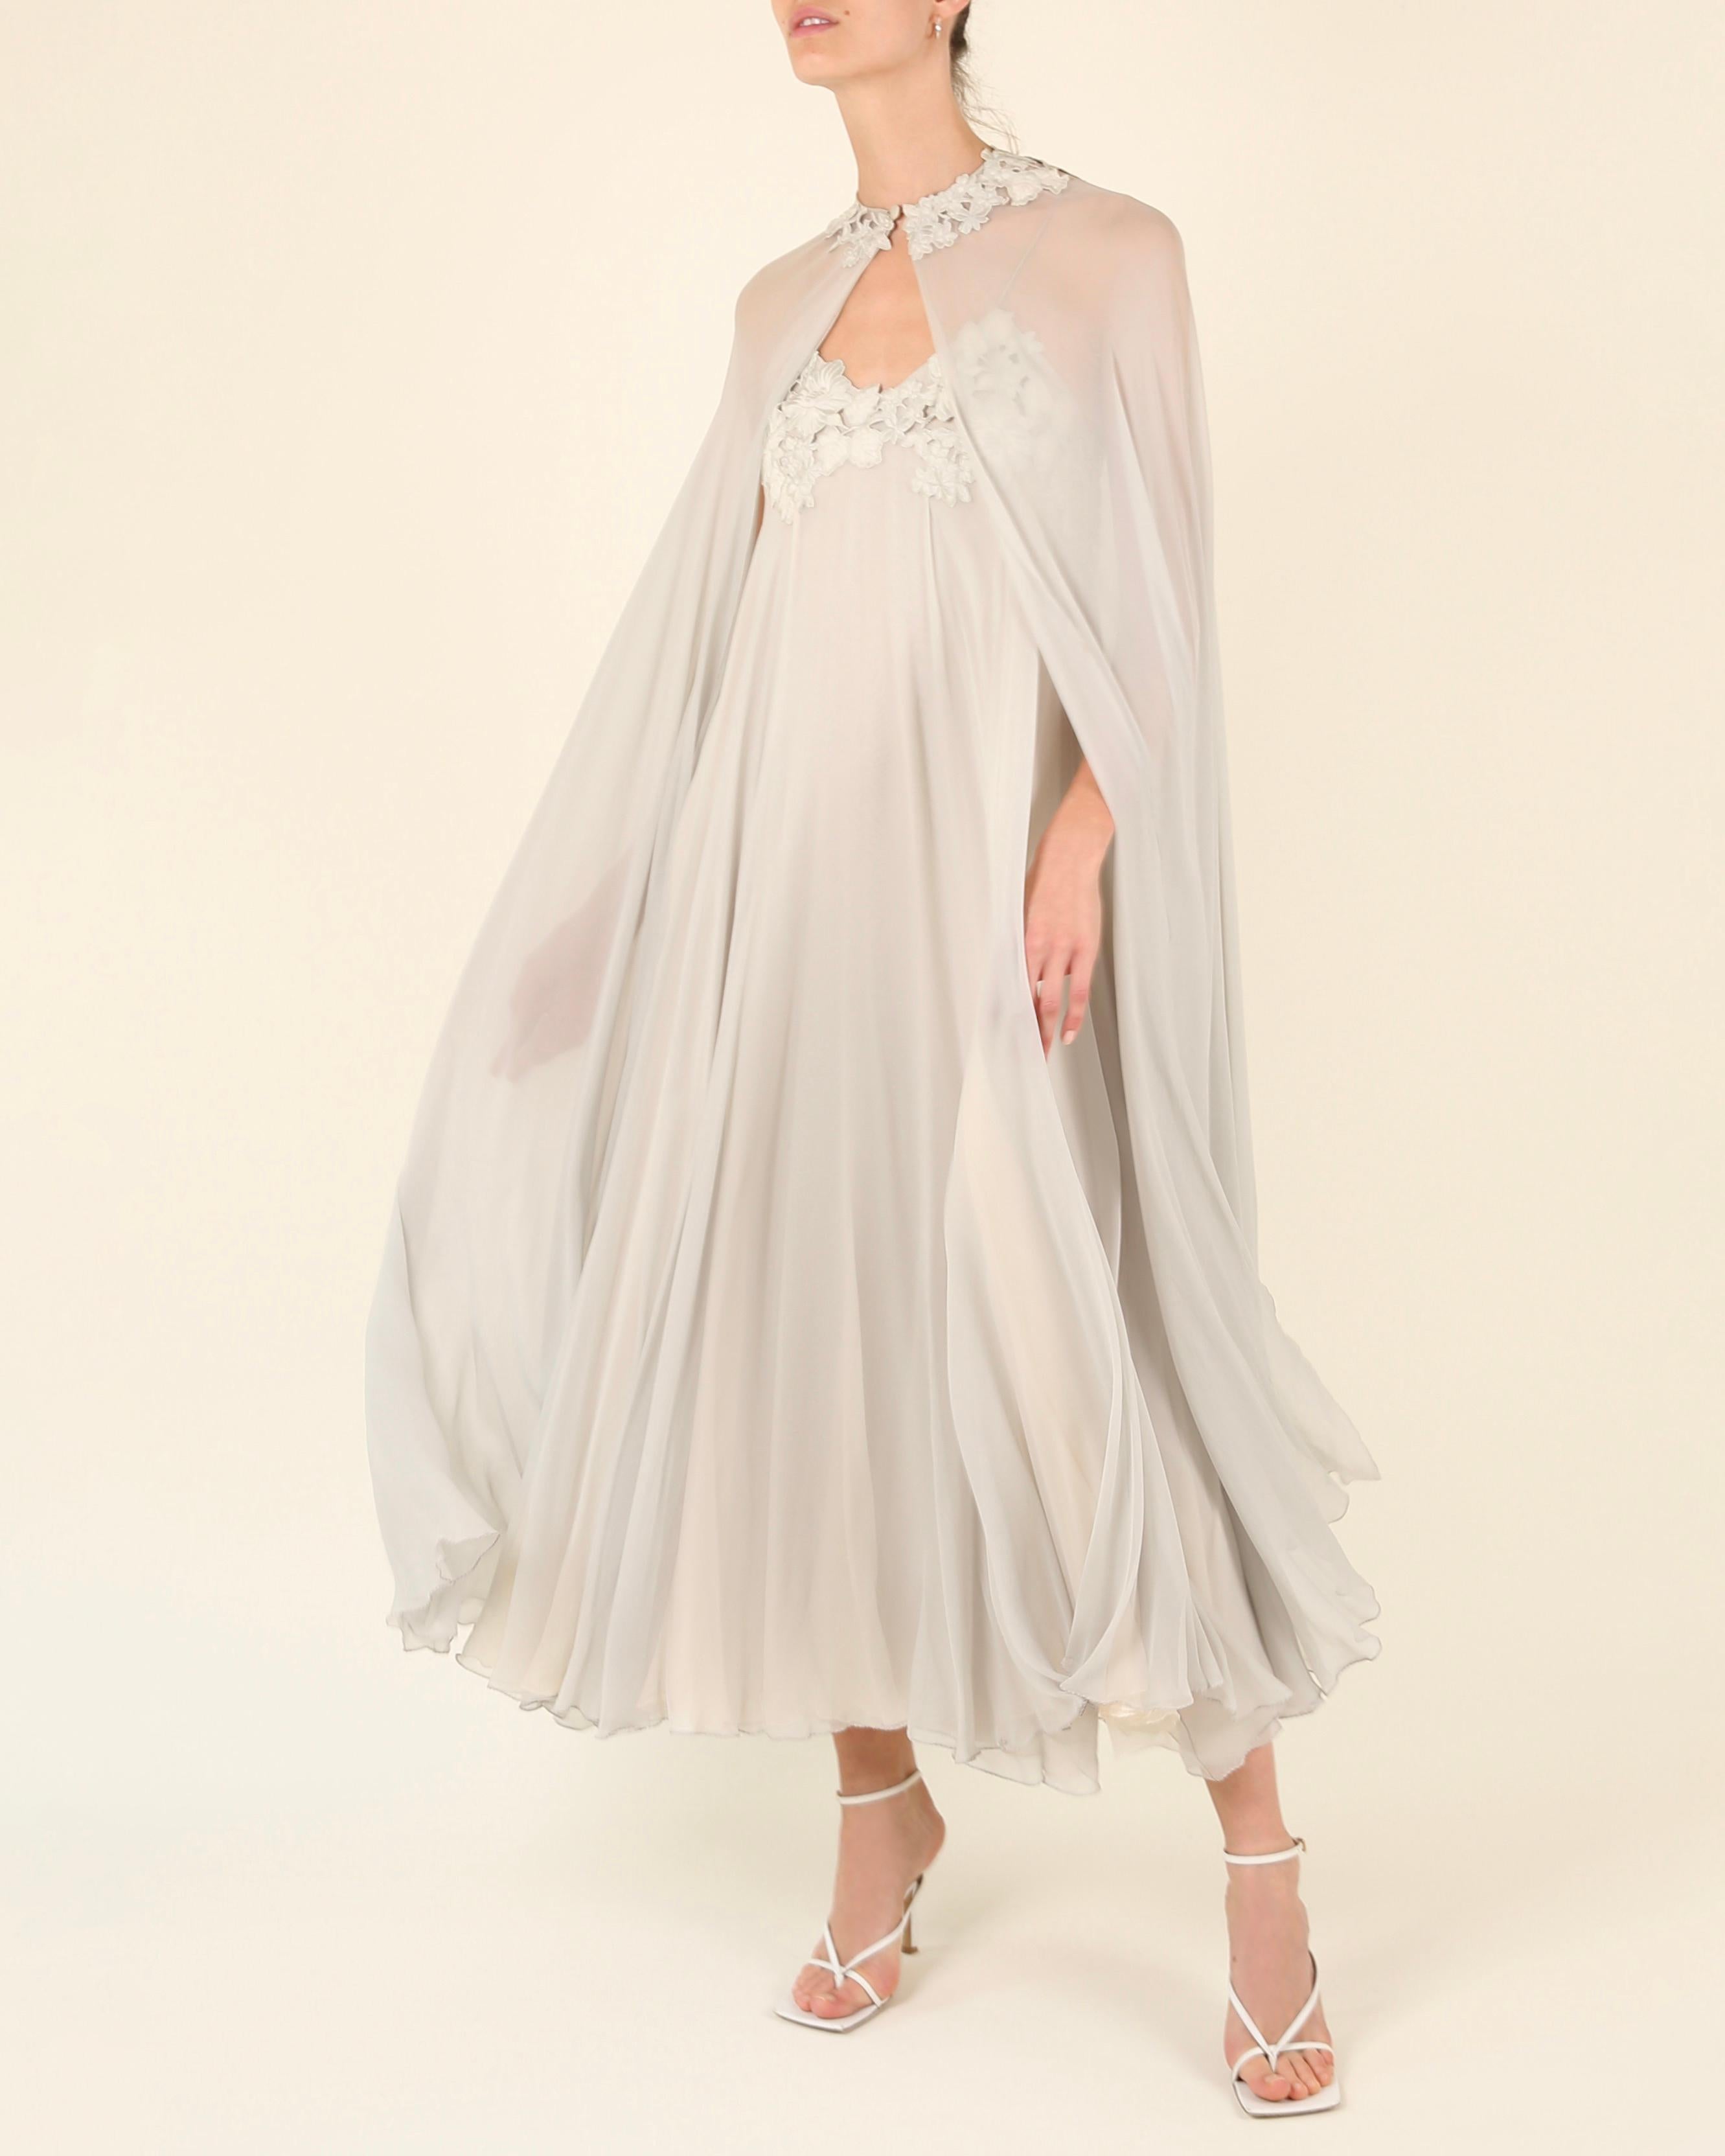 An absolutely beautifully ethereal dress in a soft blueish grey with its matching cape by George Stavropoulos dating back to the 1970's. I am lost for words at this dress, it is certainly the most beautiful I have come across so far by Stavropoulous